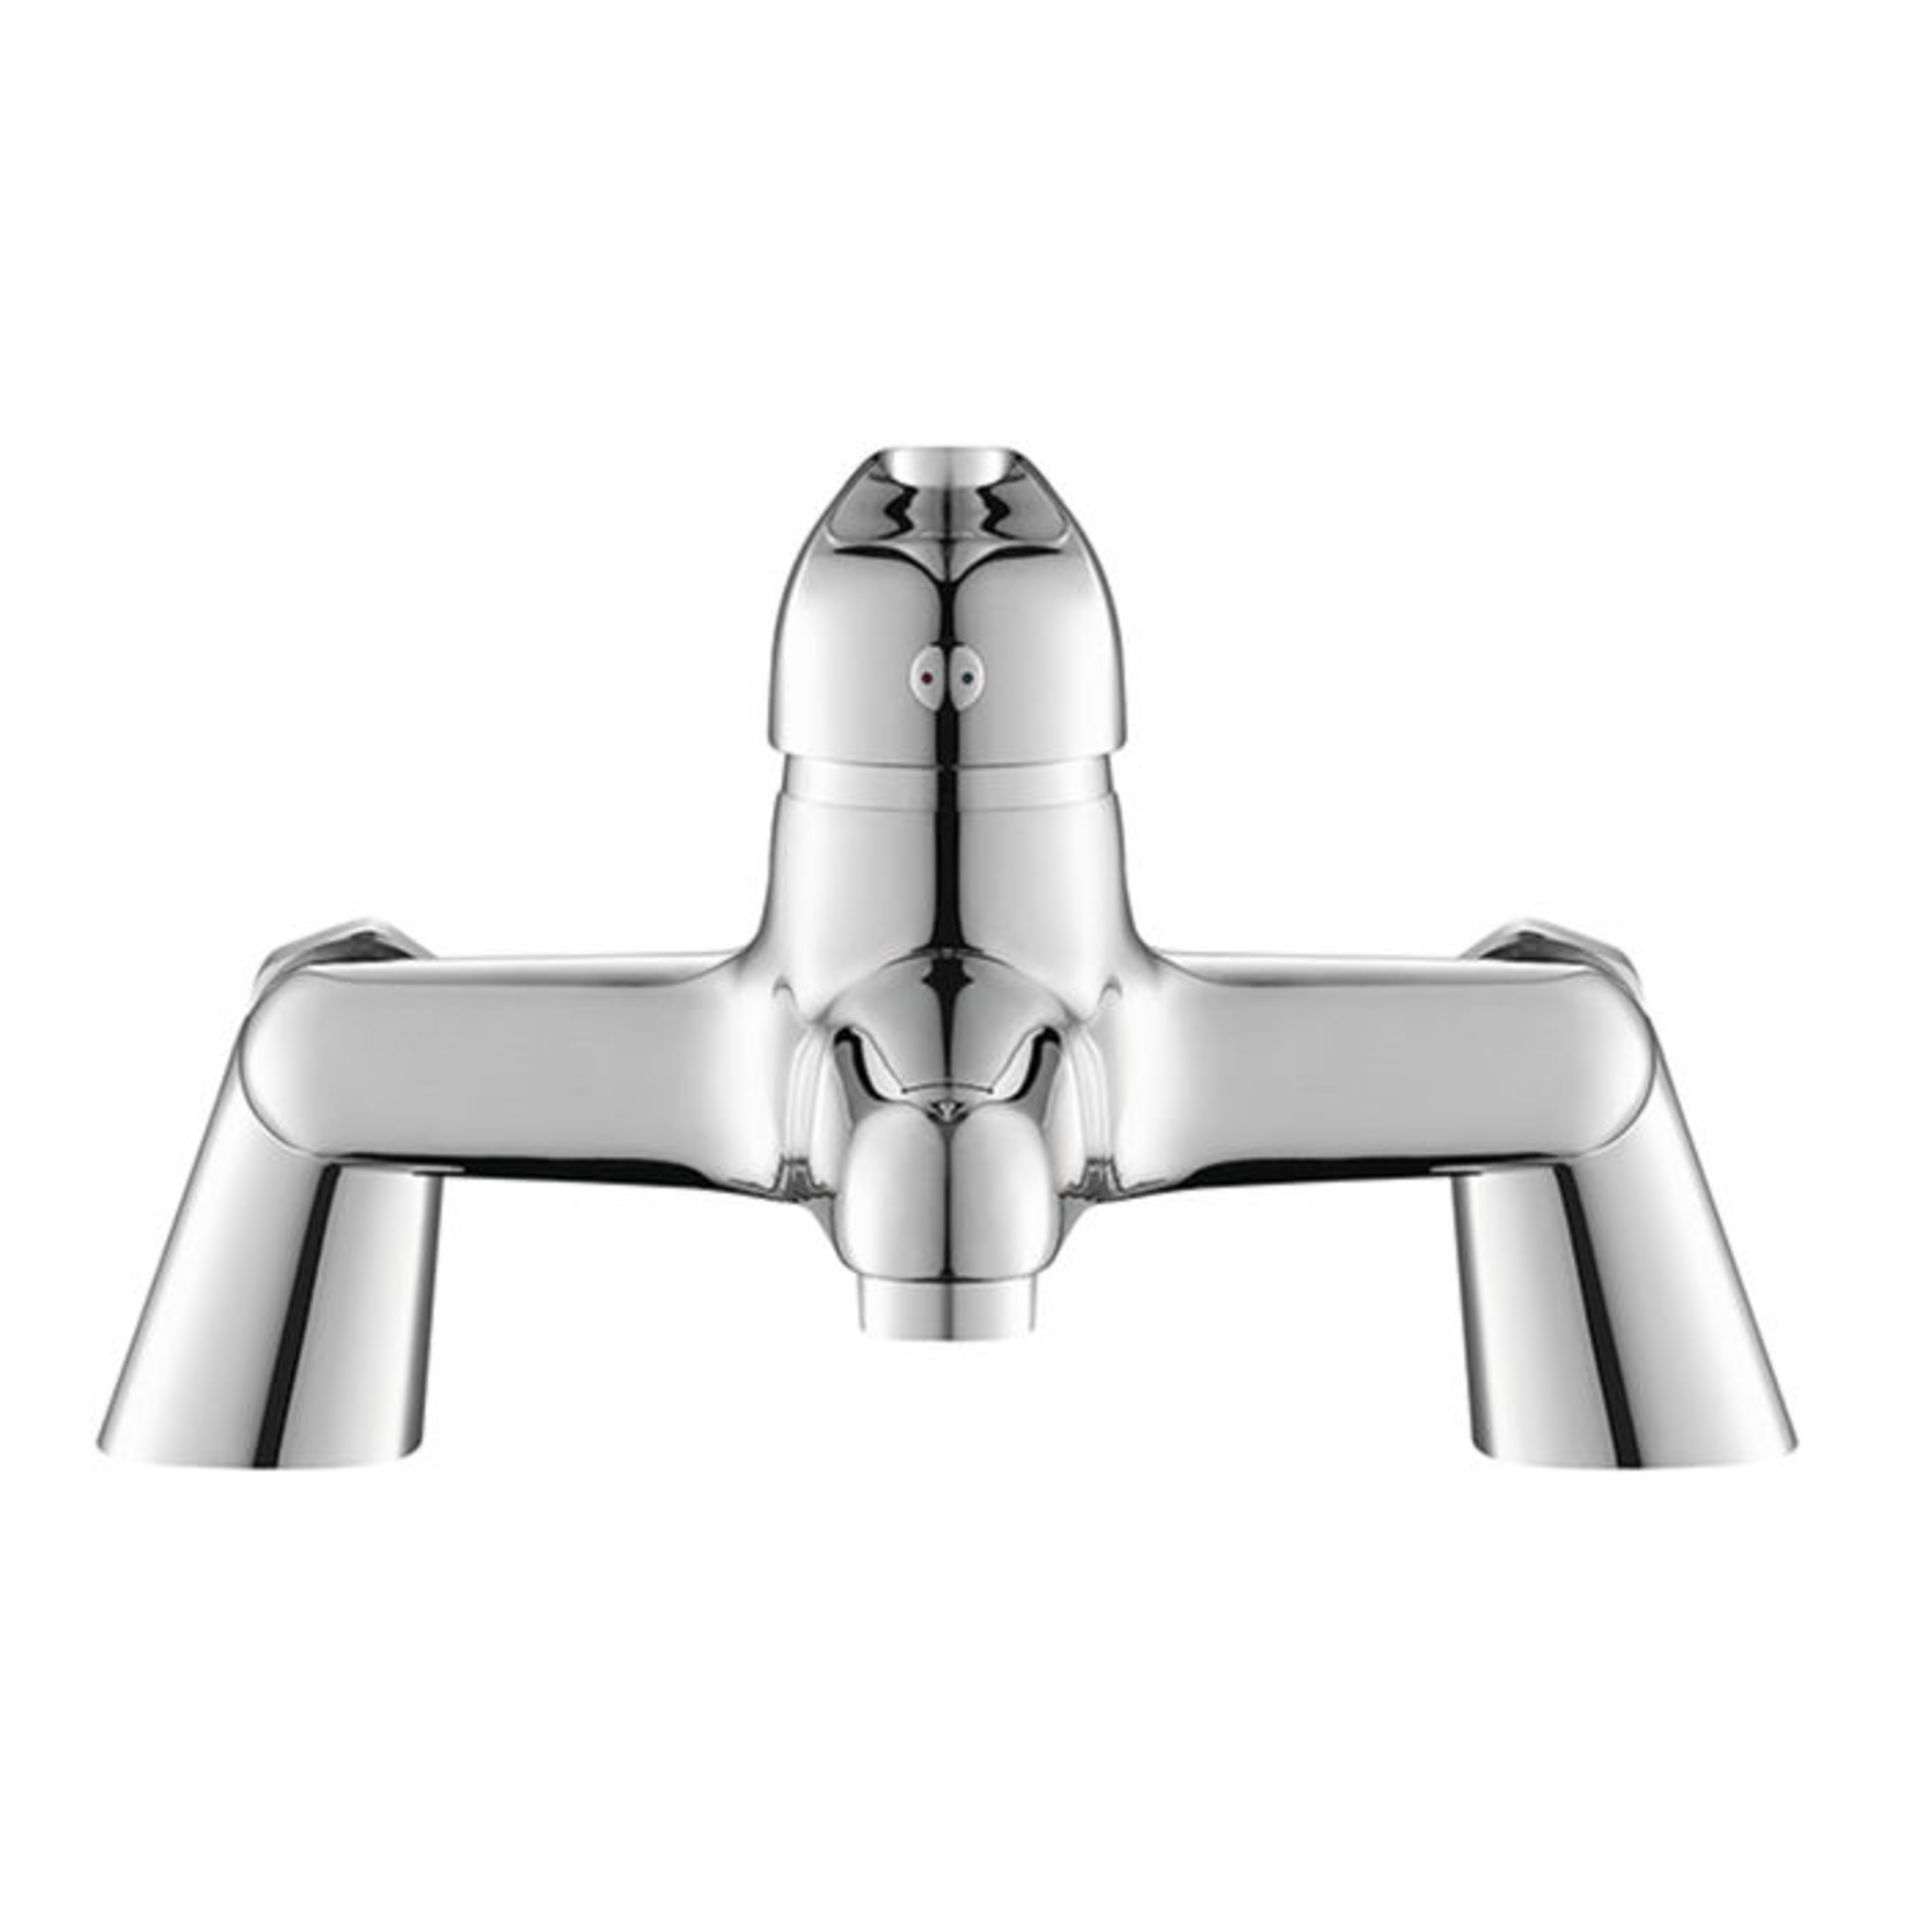 (LX7 ) Sleek Bath Filler Mixer Tap Chrome Plated Solid Brass 1/4 turn solid brass valve with ceramic - Image 3 of 3